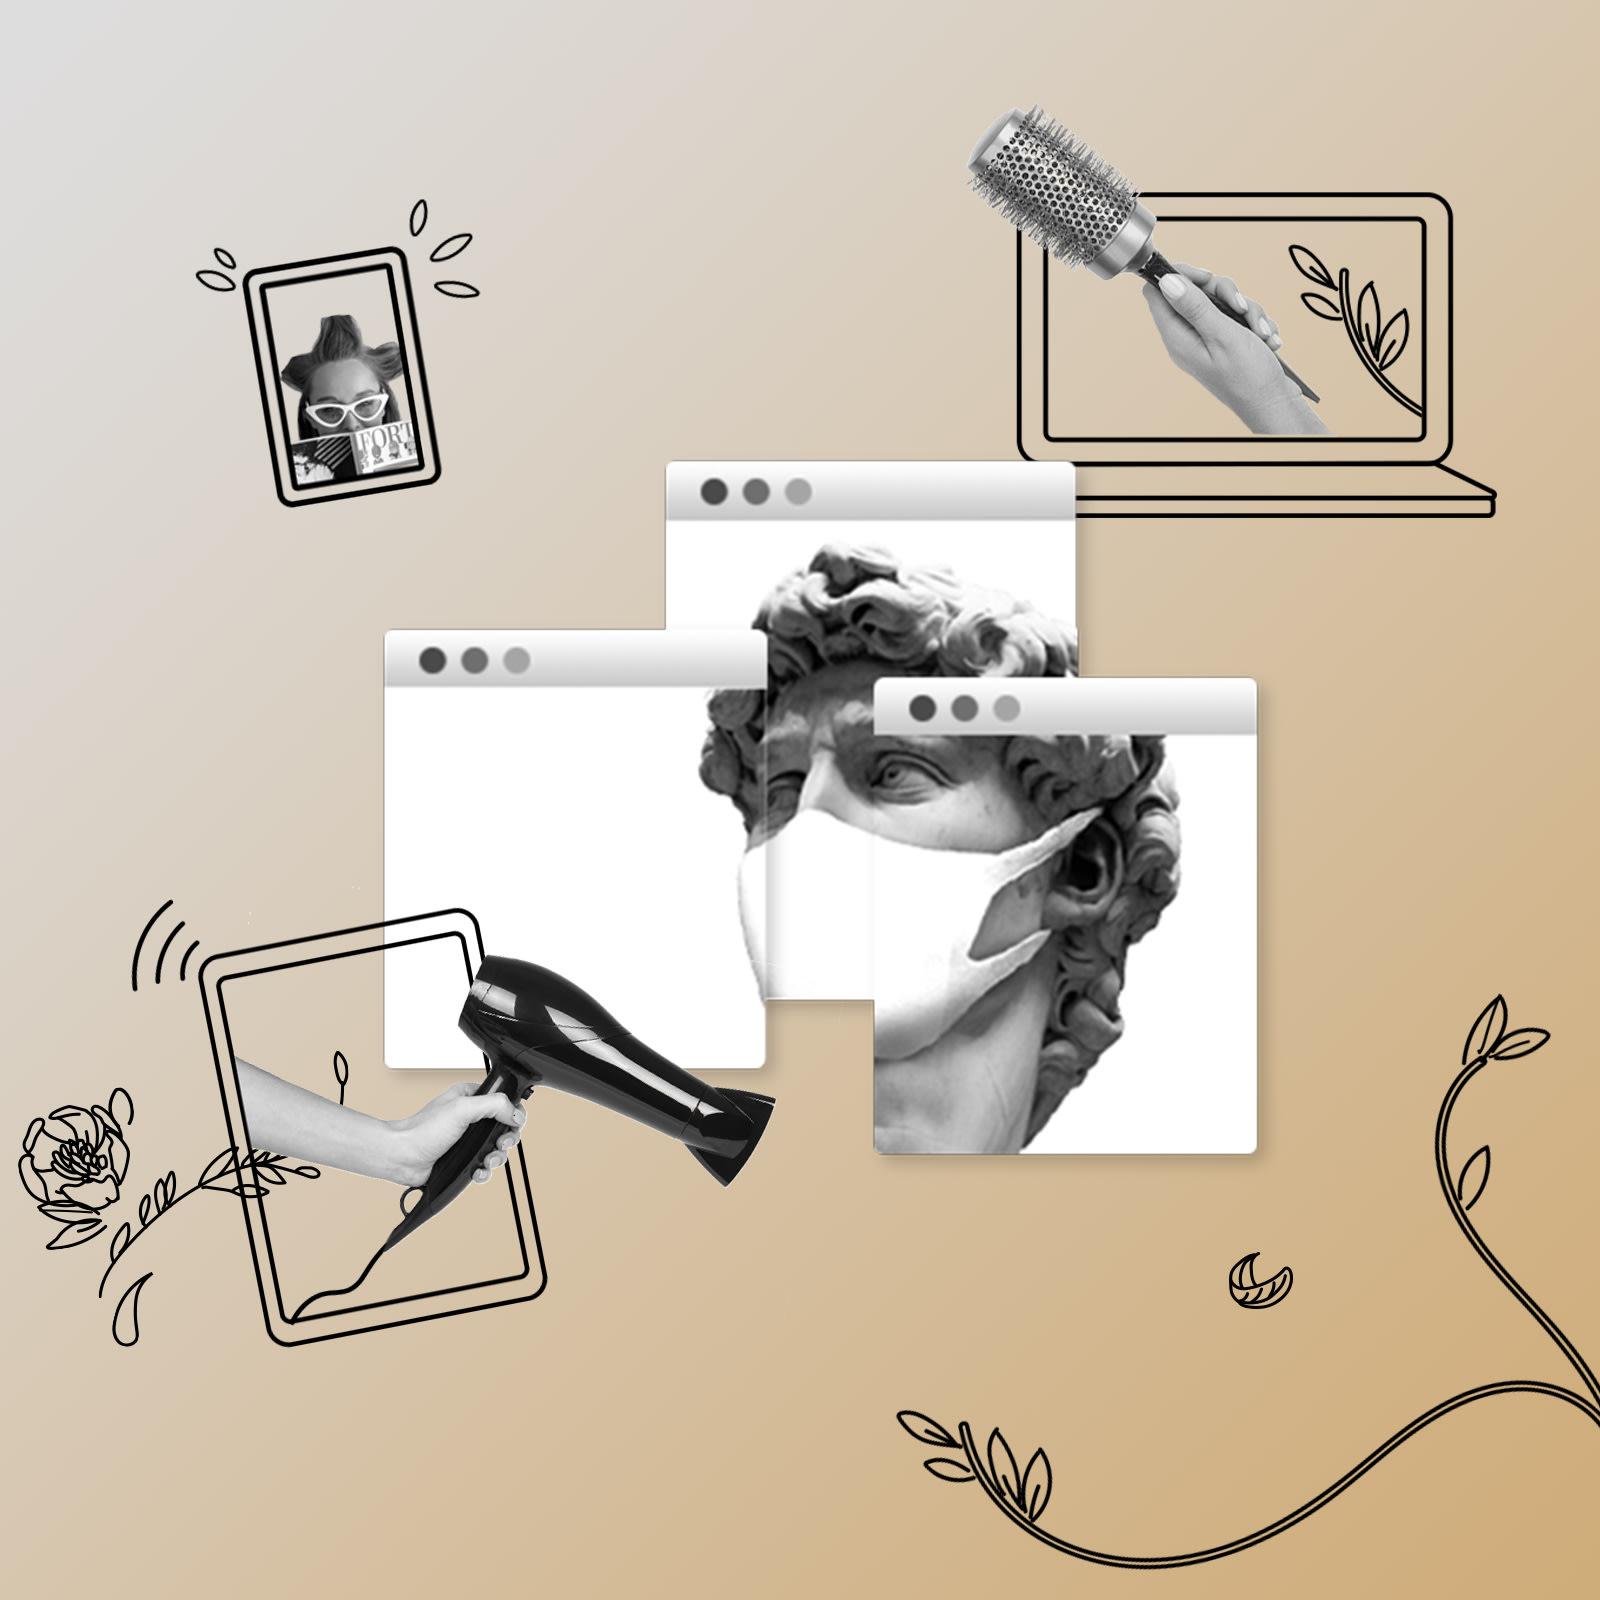 Illustration of a blow dryer coming out of a tablet, a statue head in a mask in browser windows, and a round brush coming out of a laptop